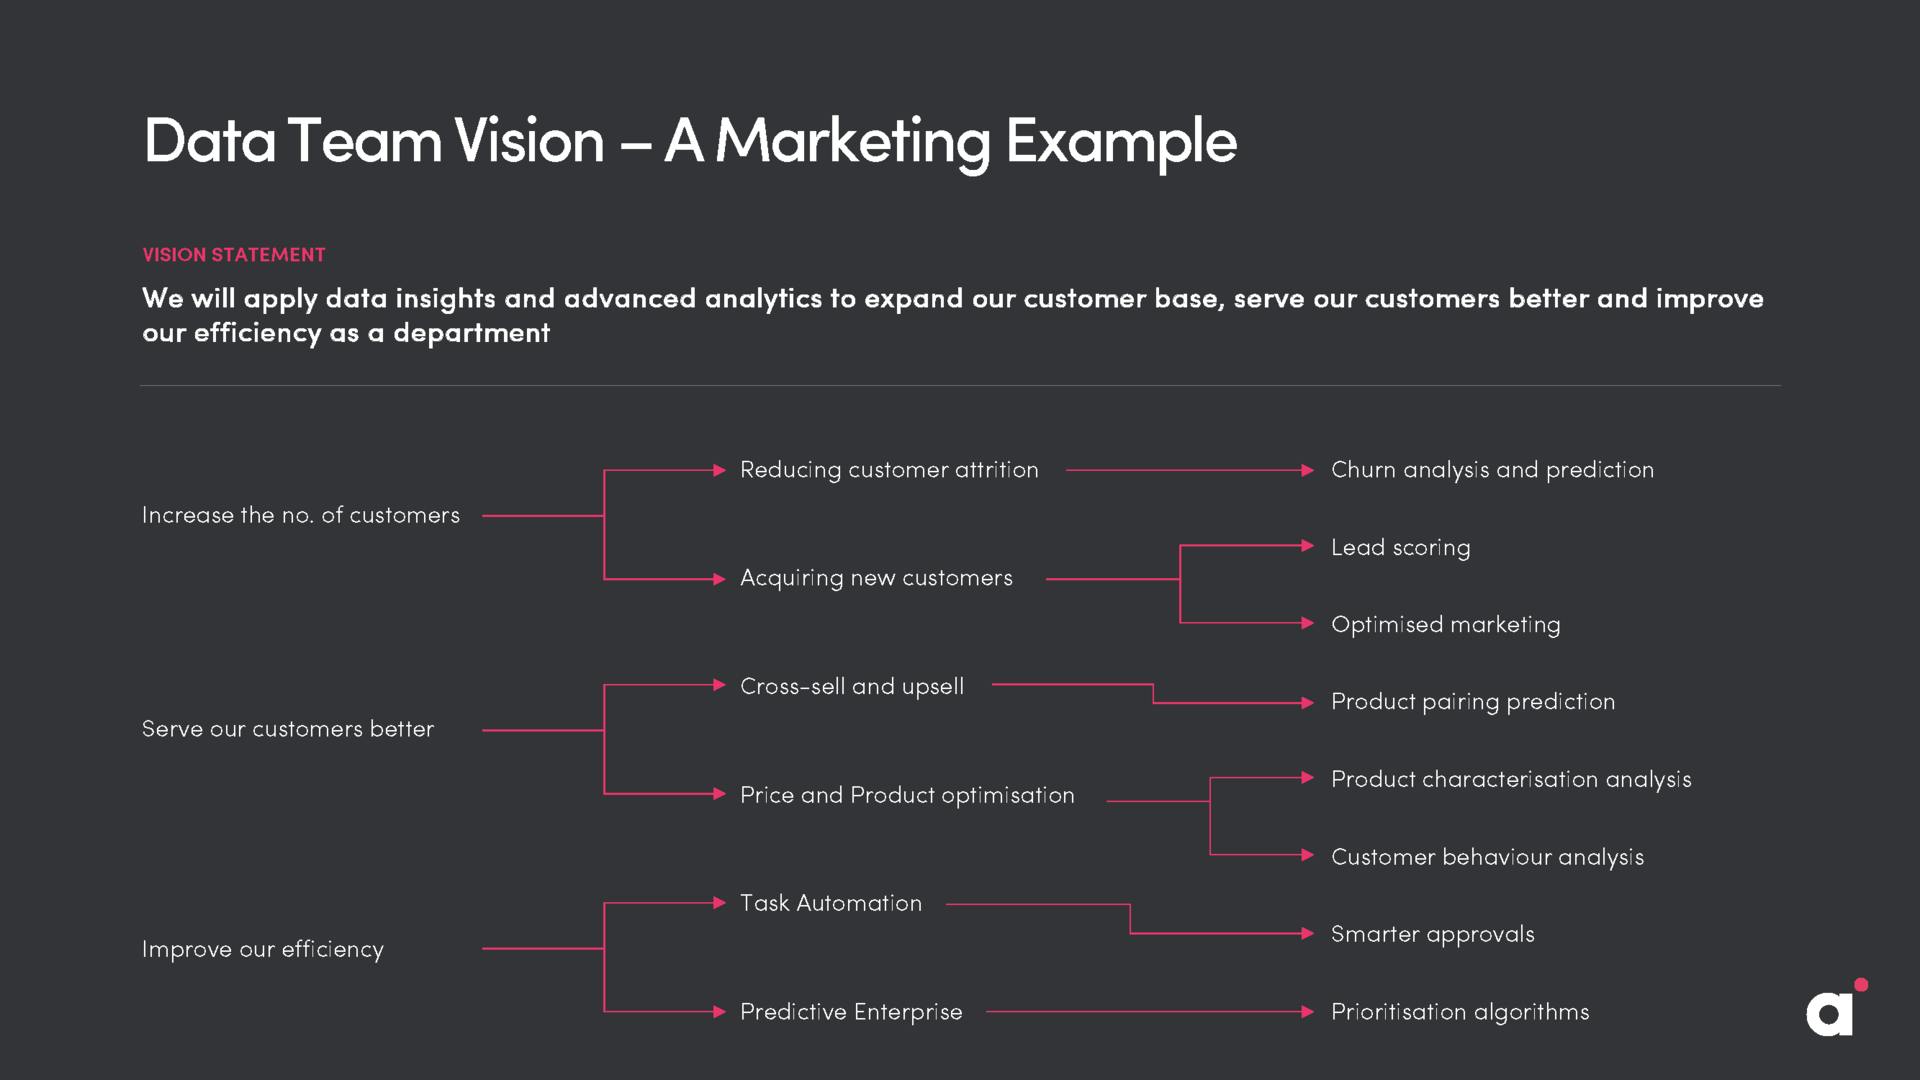 Data Team Vision - an example from marketing